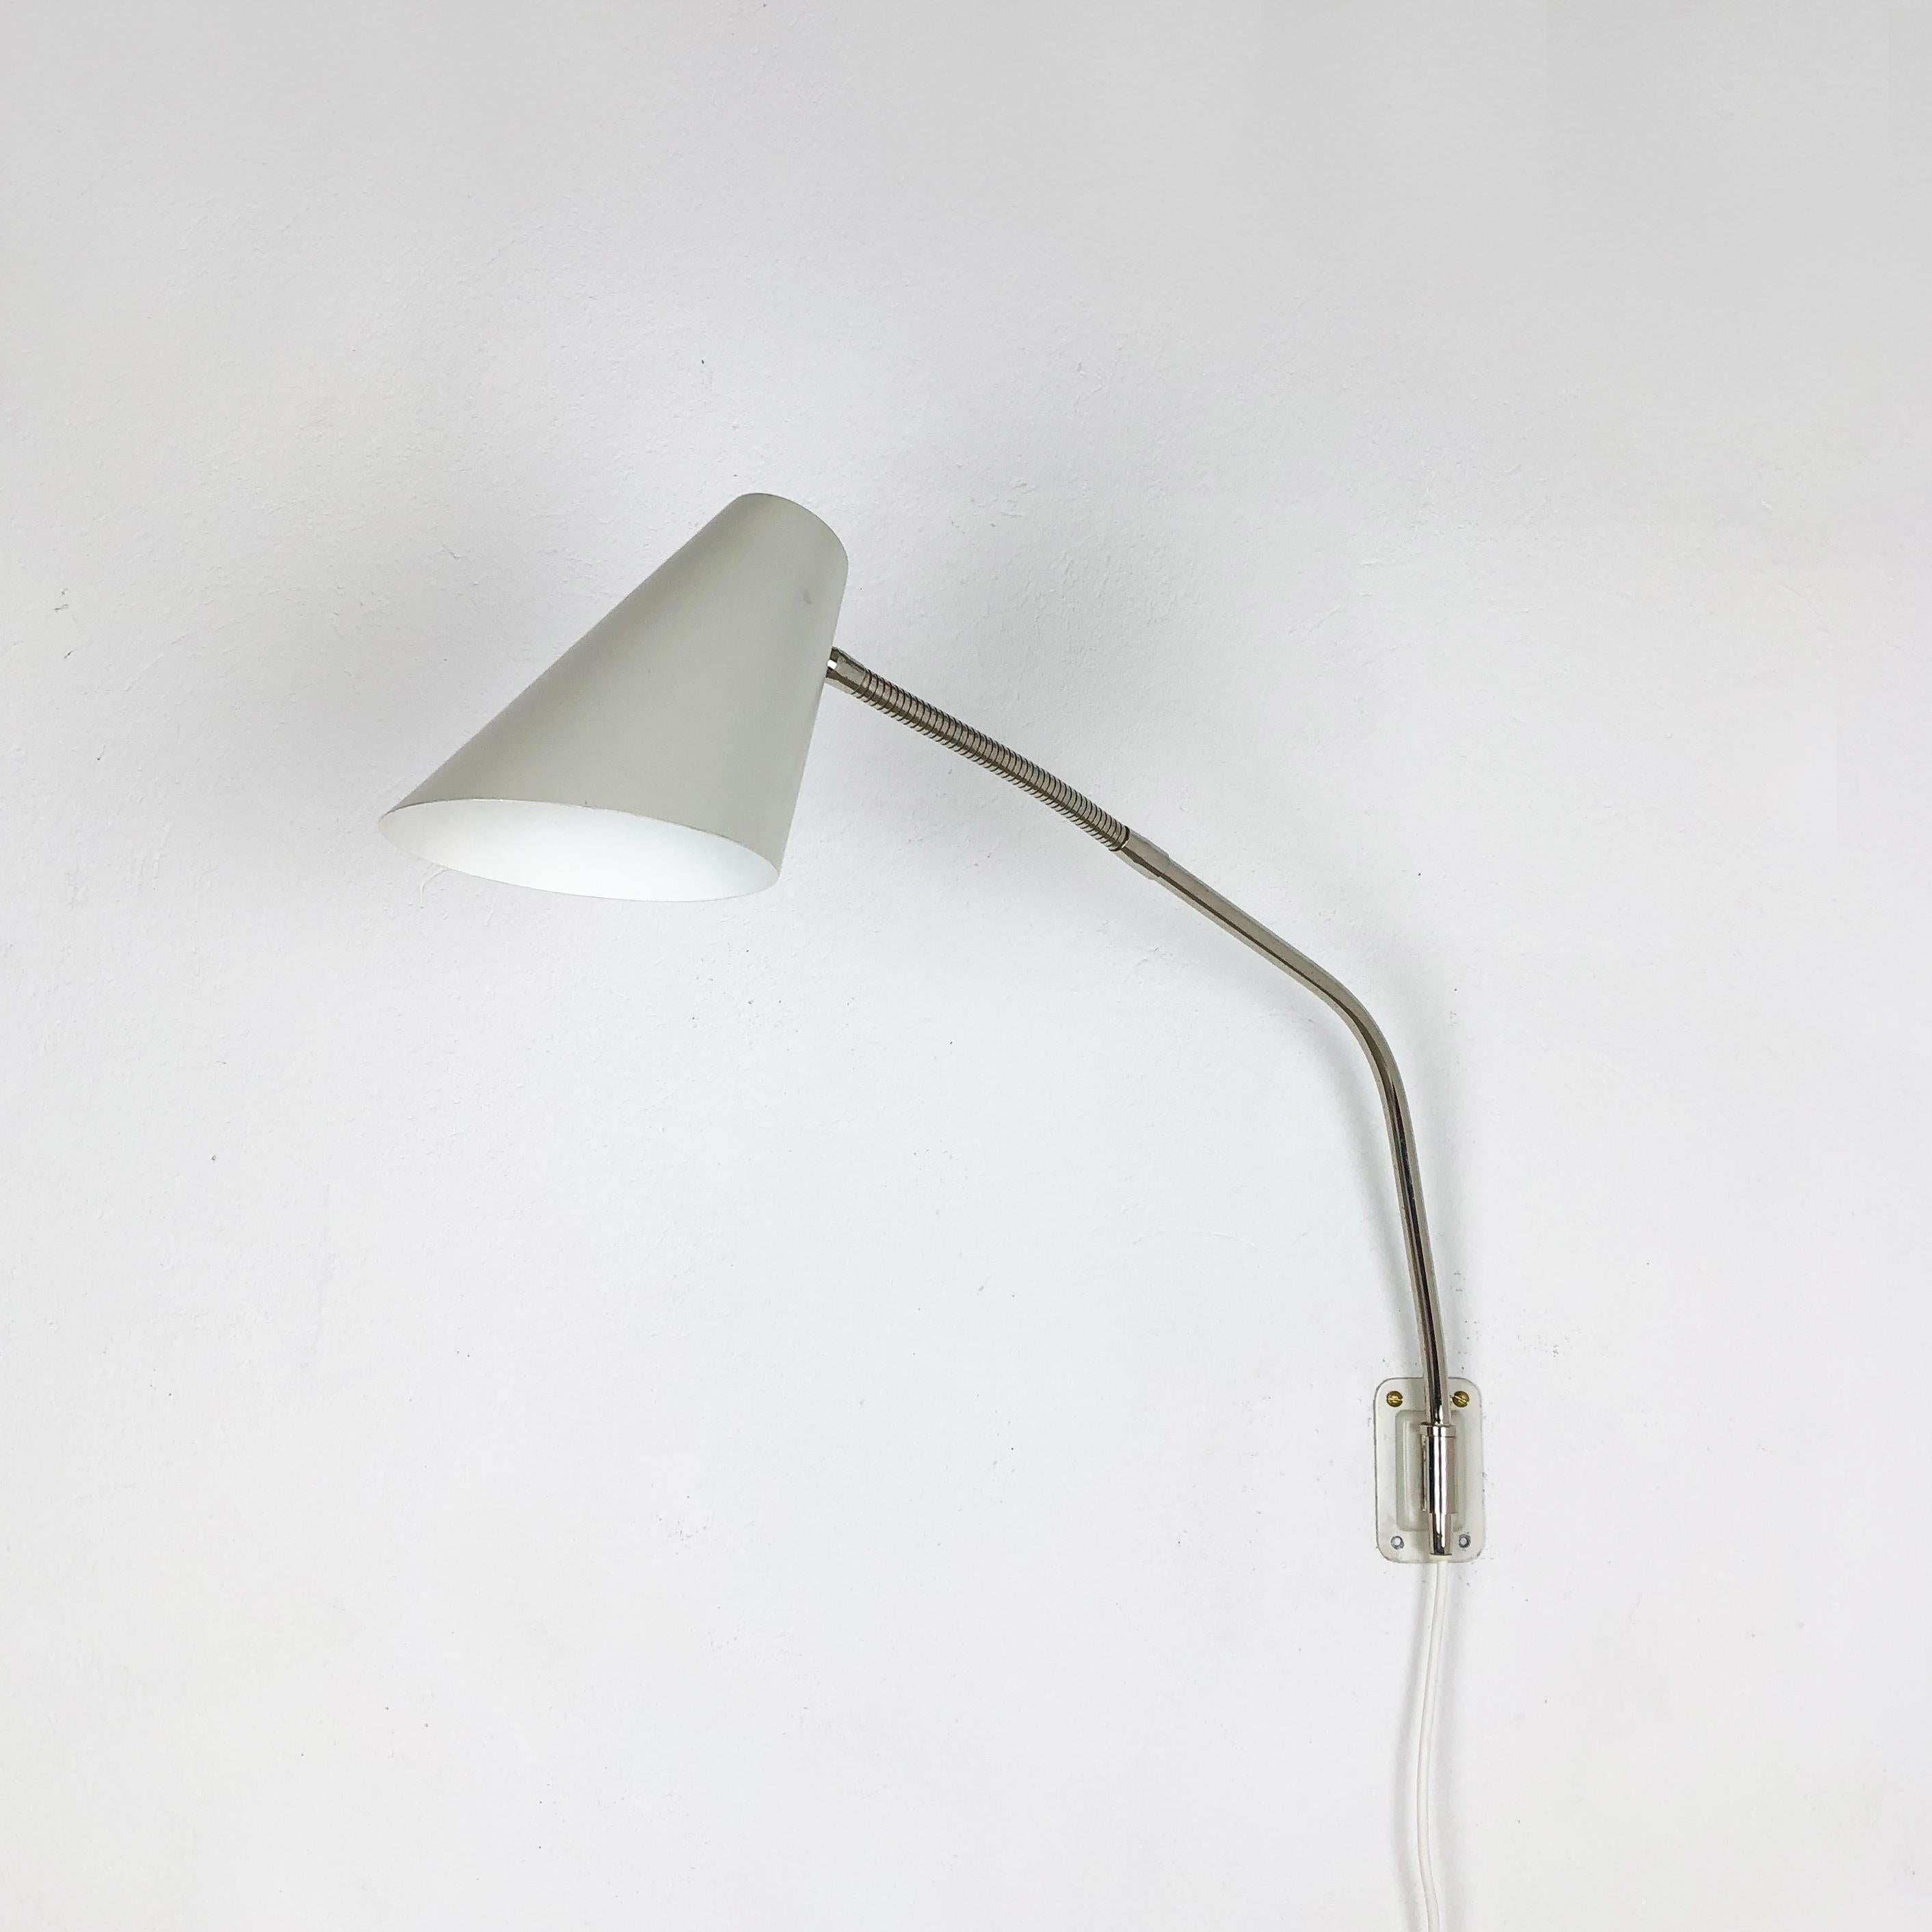 Article:

wall light


Producer:

Kaiser Leuchten, Germany


Origin:

Germany



Age:

1960s





This vintage wall light was made by German premium light producer, Kaiser Leuchten in Germany in the 1960s. The light shade is